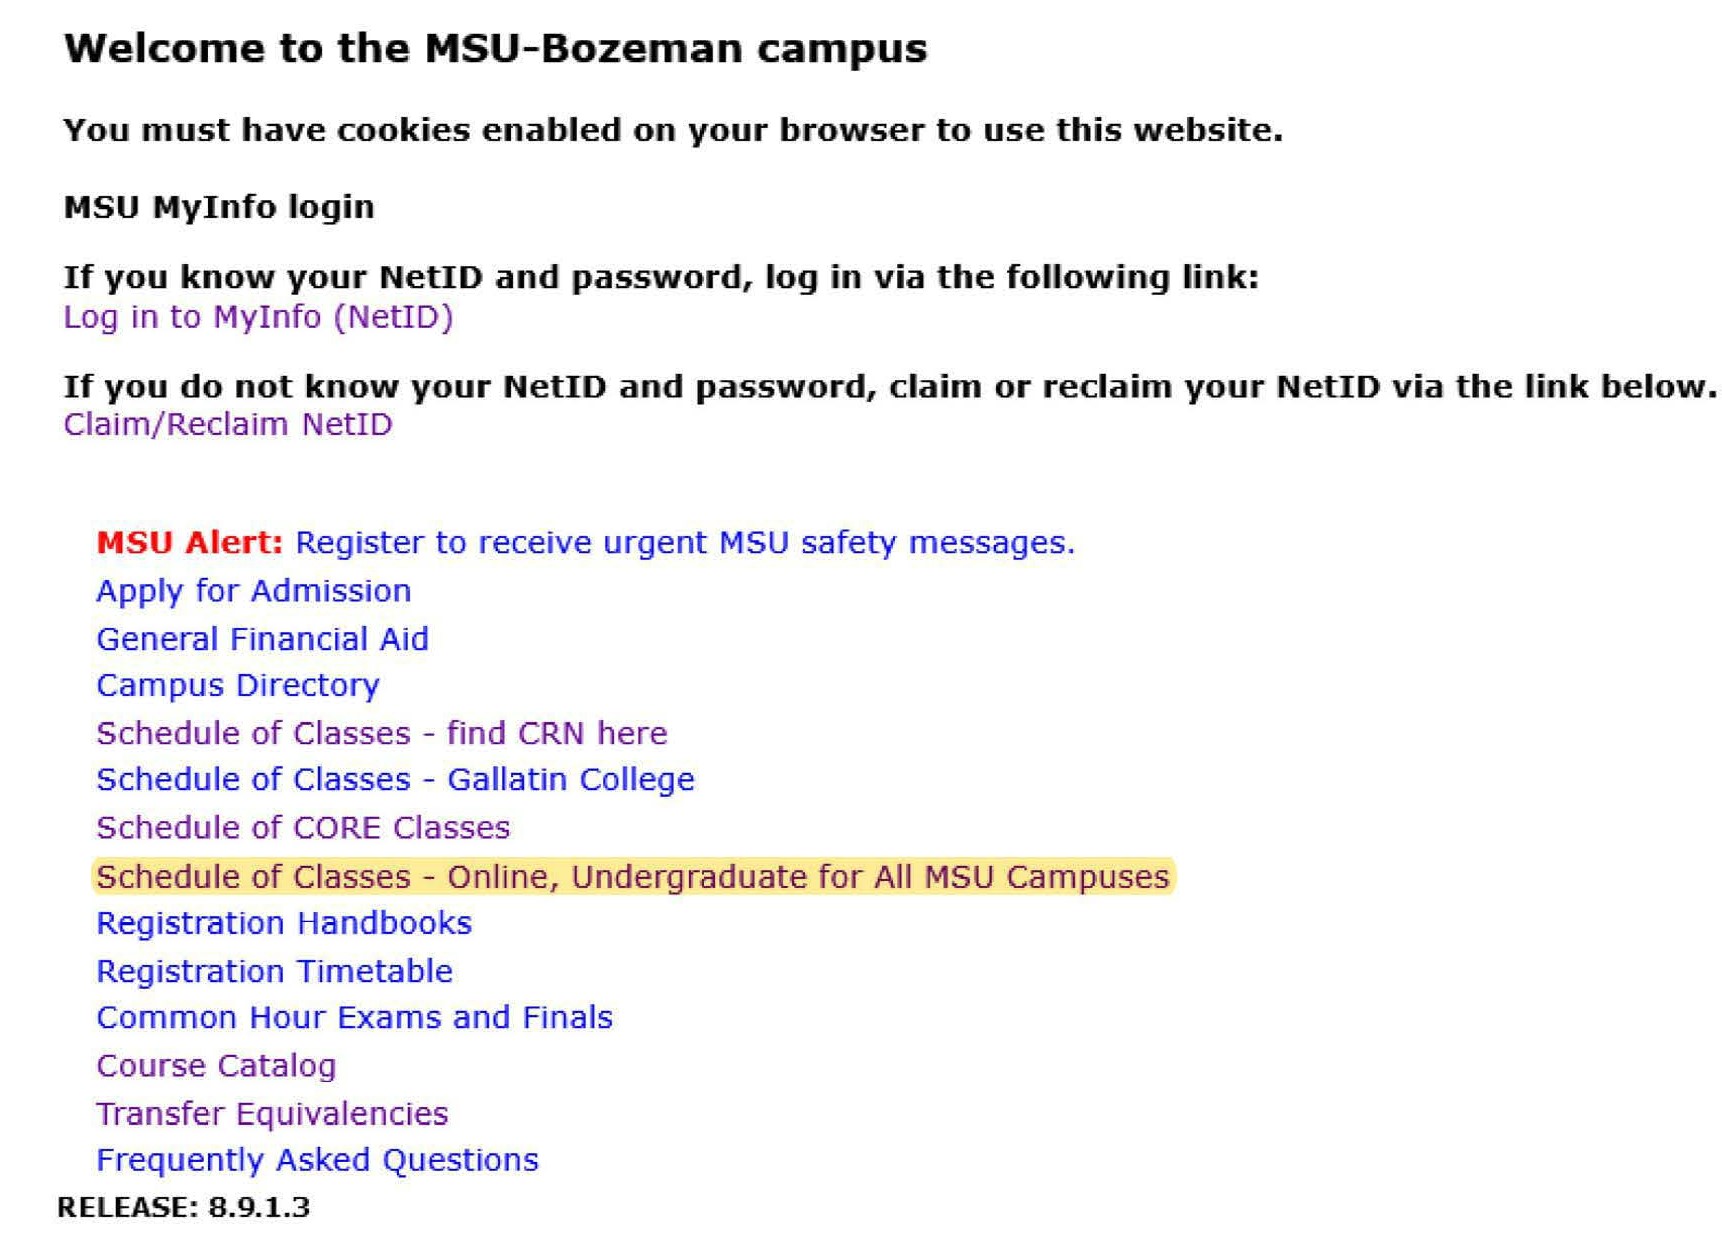 myinfo page with schedule of classes for all four MSU campuses highlighted